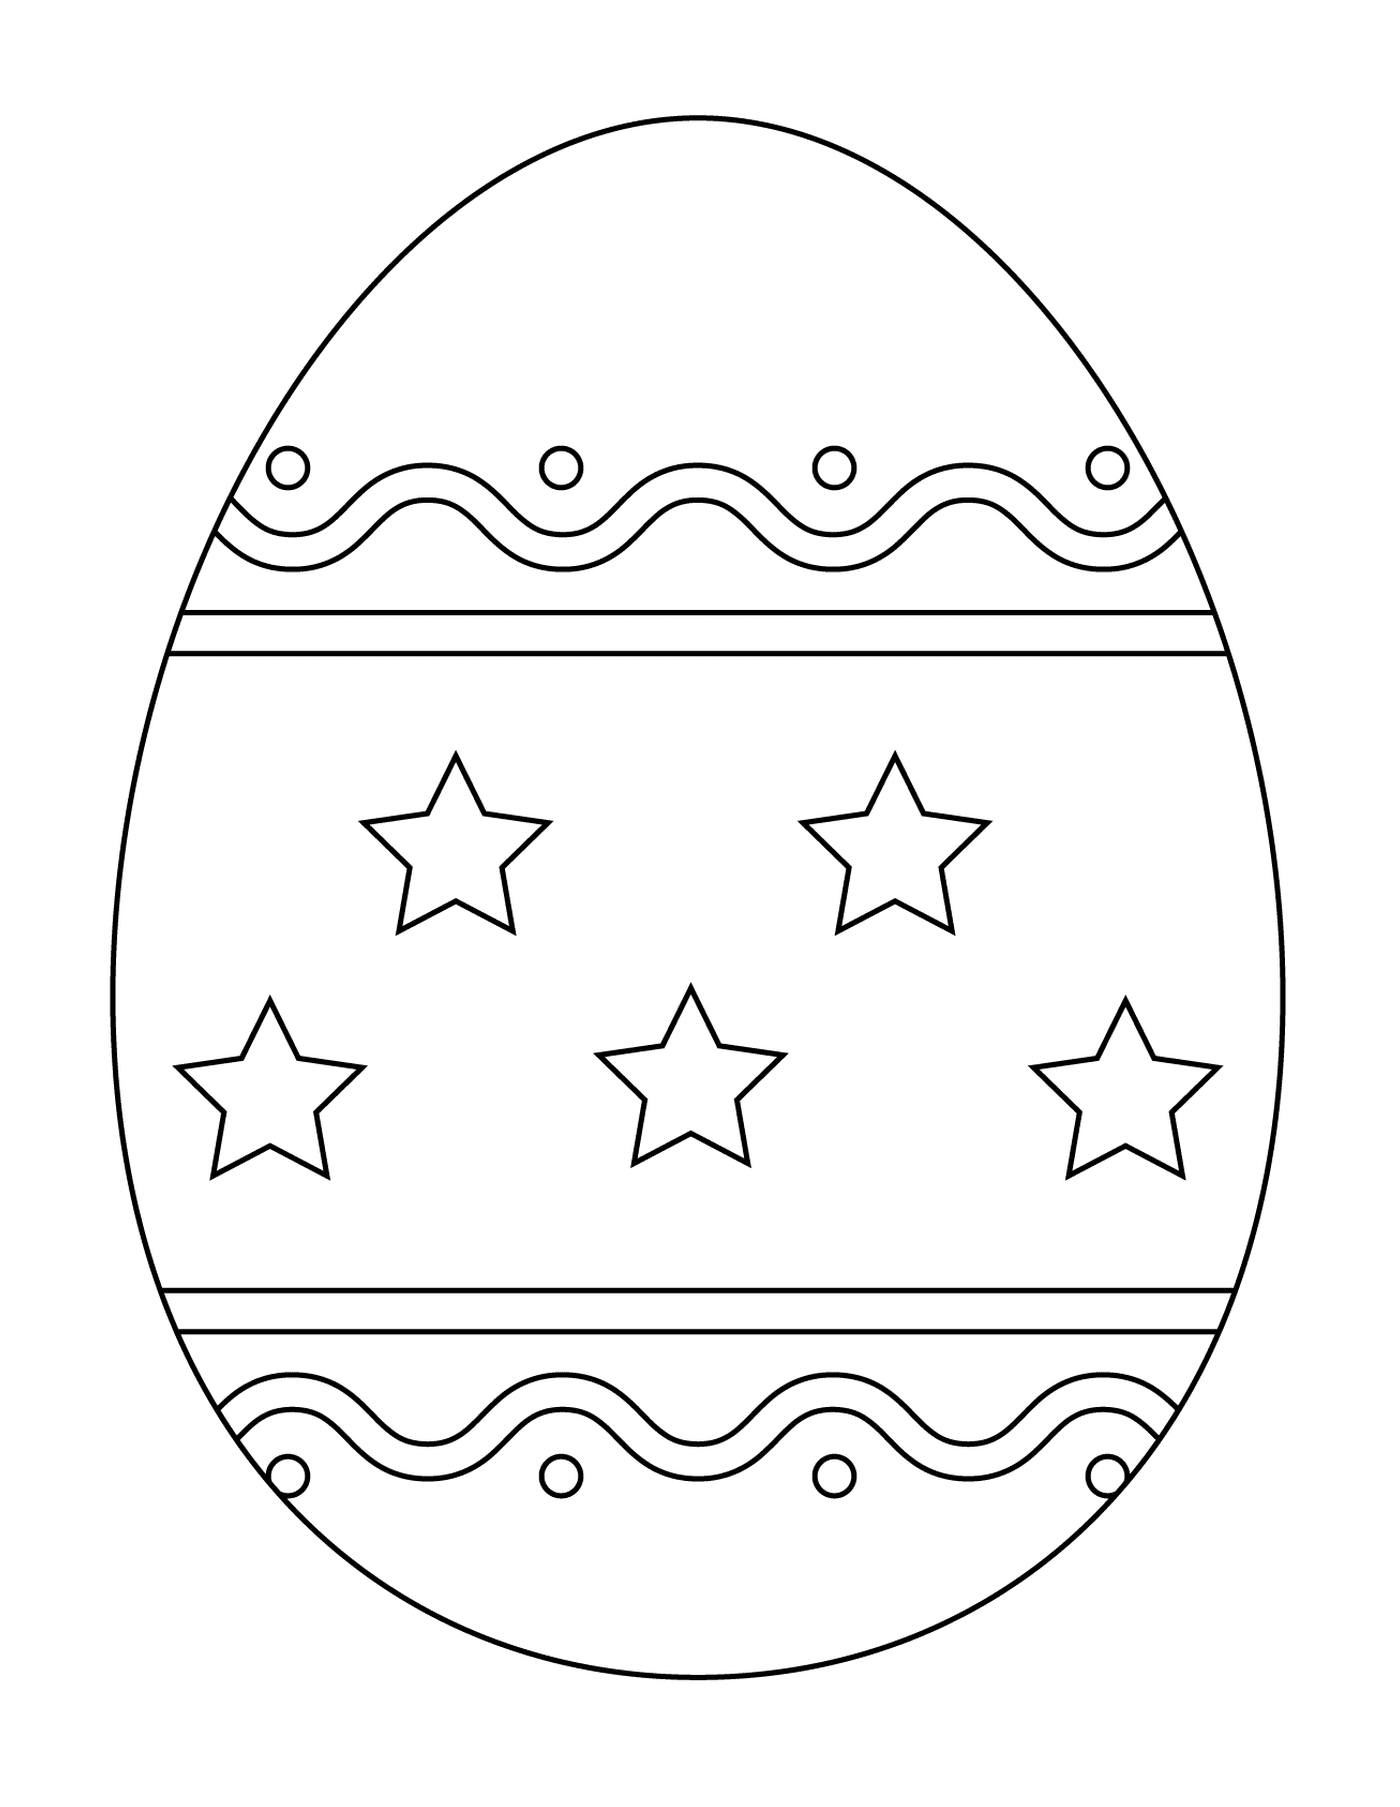  Easter egg with simple pattern 